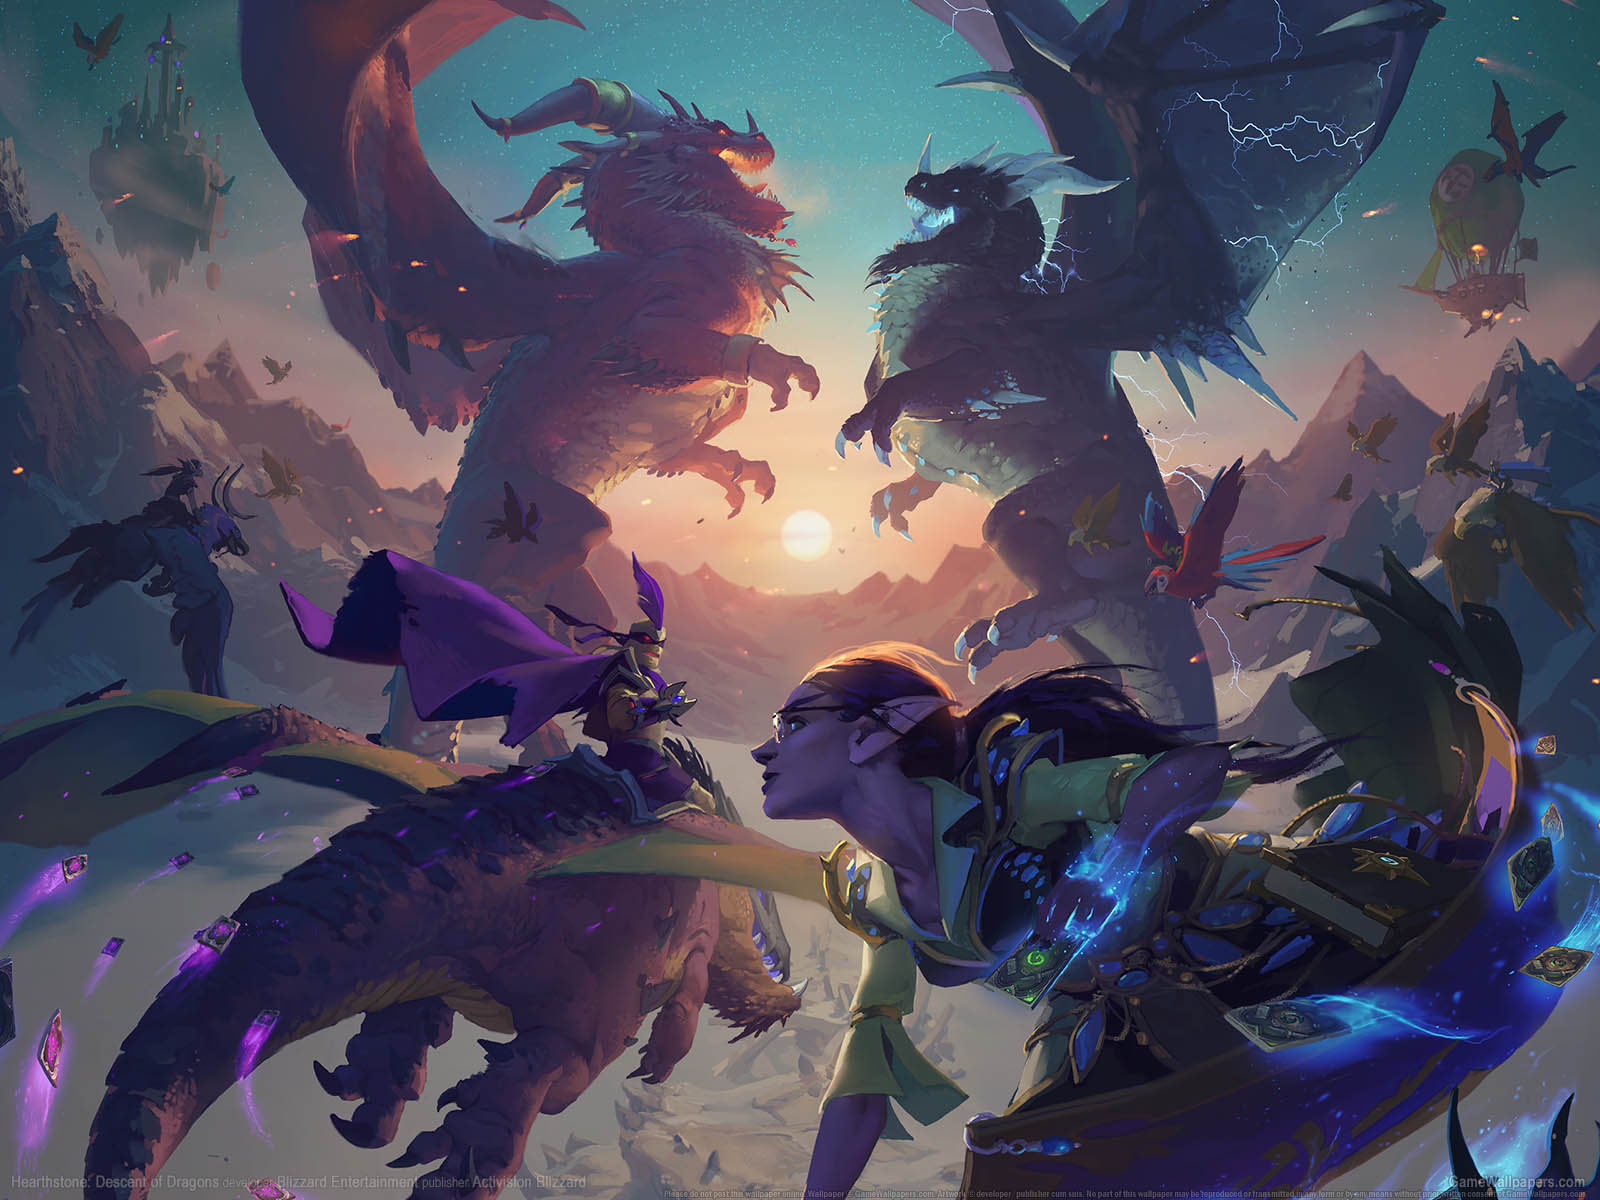 Hearthstone%3A Descent of Dragons wallpaper 01 1600x1200